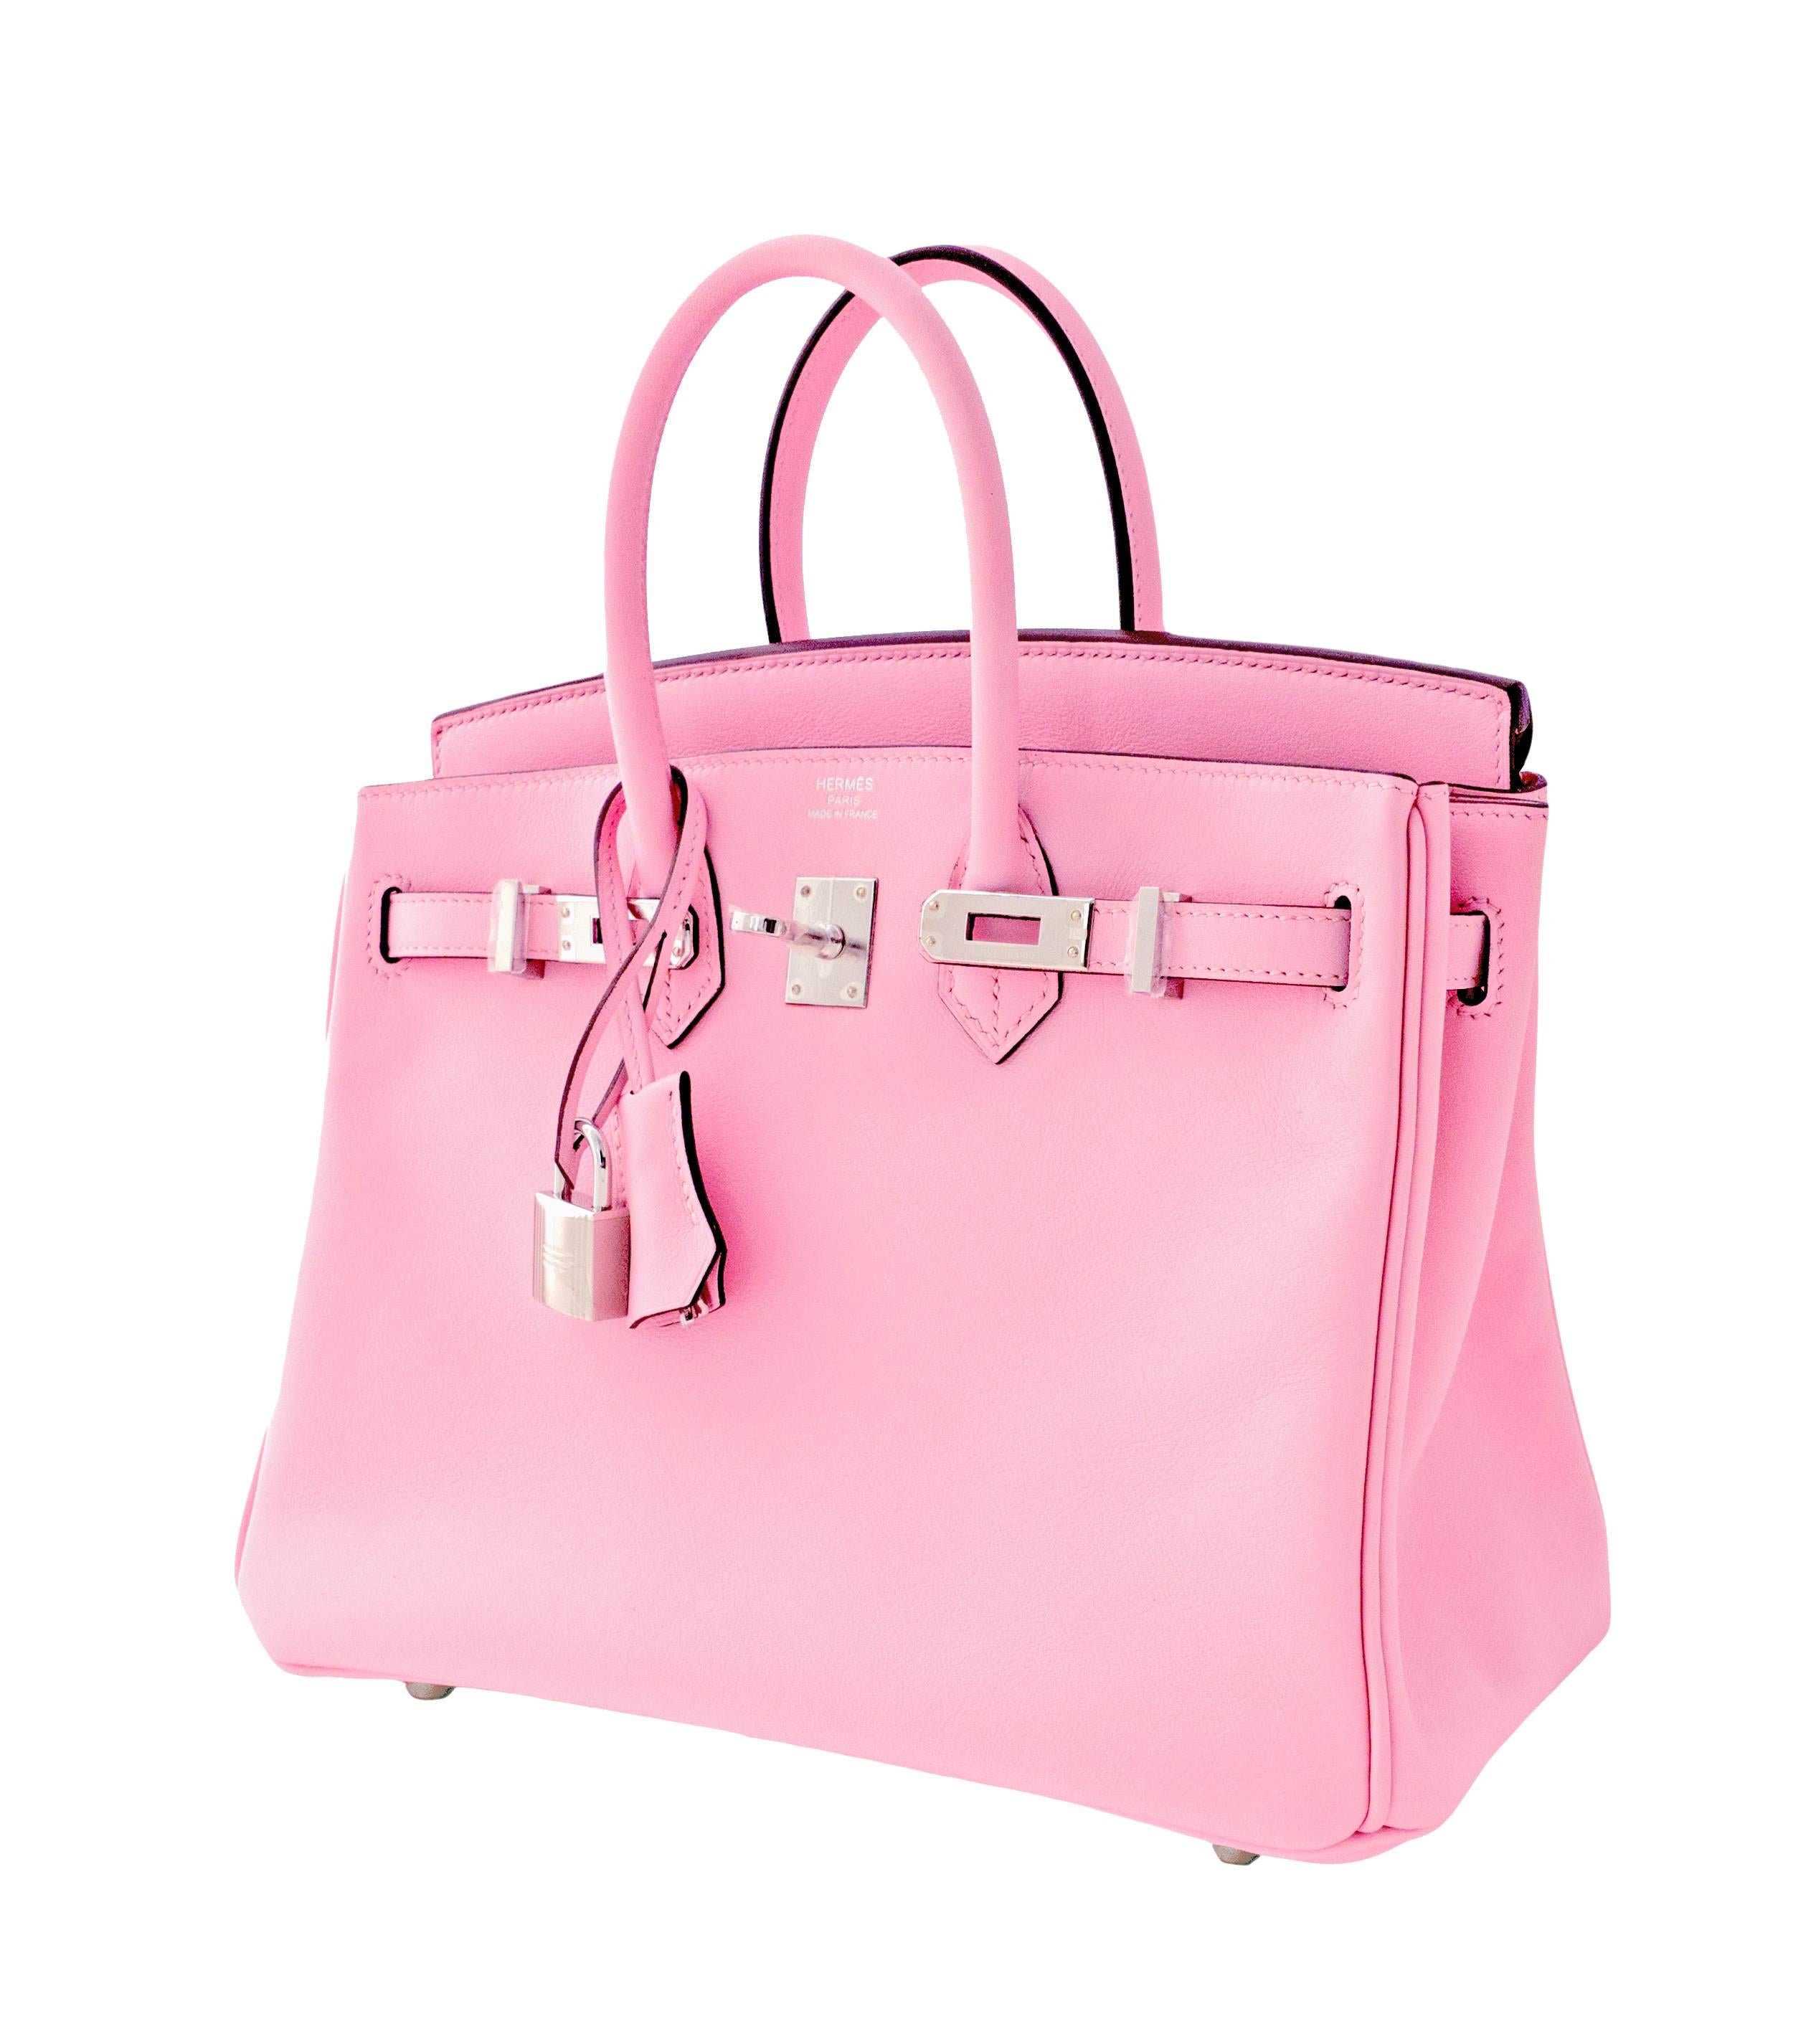 Hermes Rose Sakura Pink 25cm Swift Leather Birkin Satchel Bag Jewel
Brand New in Box- T stamp, fresh purchased from store in 2016.
Comes full set with keys, lock, clochette, a sleeper for the bag, rain protector, Hermes ribbon, and original